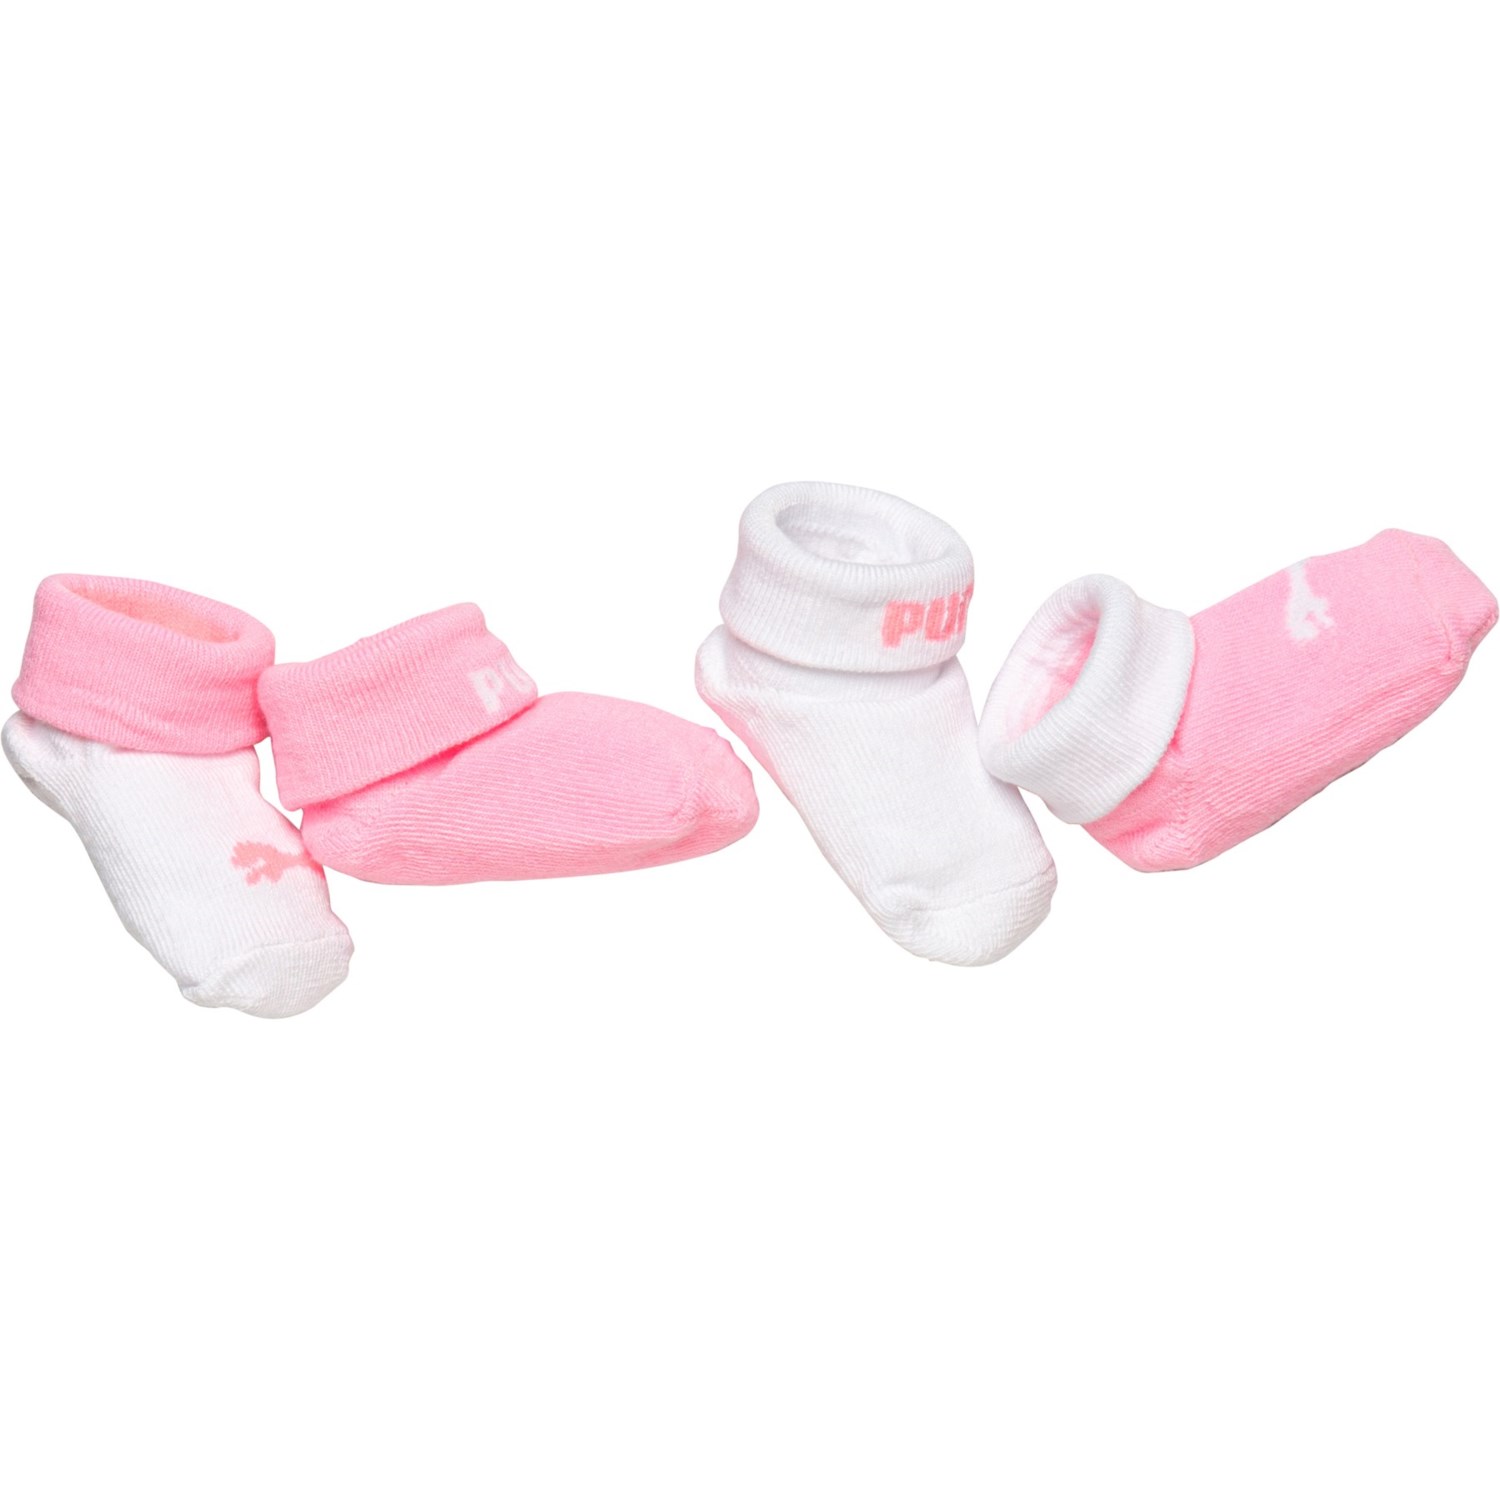 4-Pack Puma Non-Terry Bootie Socks Box Set (For Infant Girls)